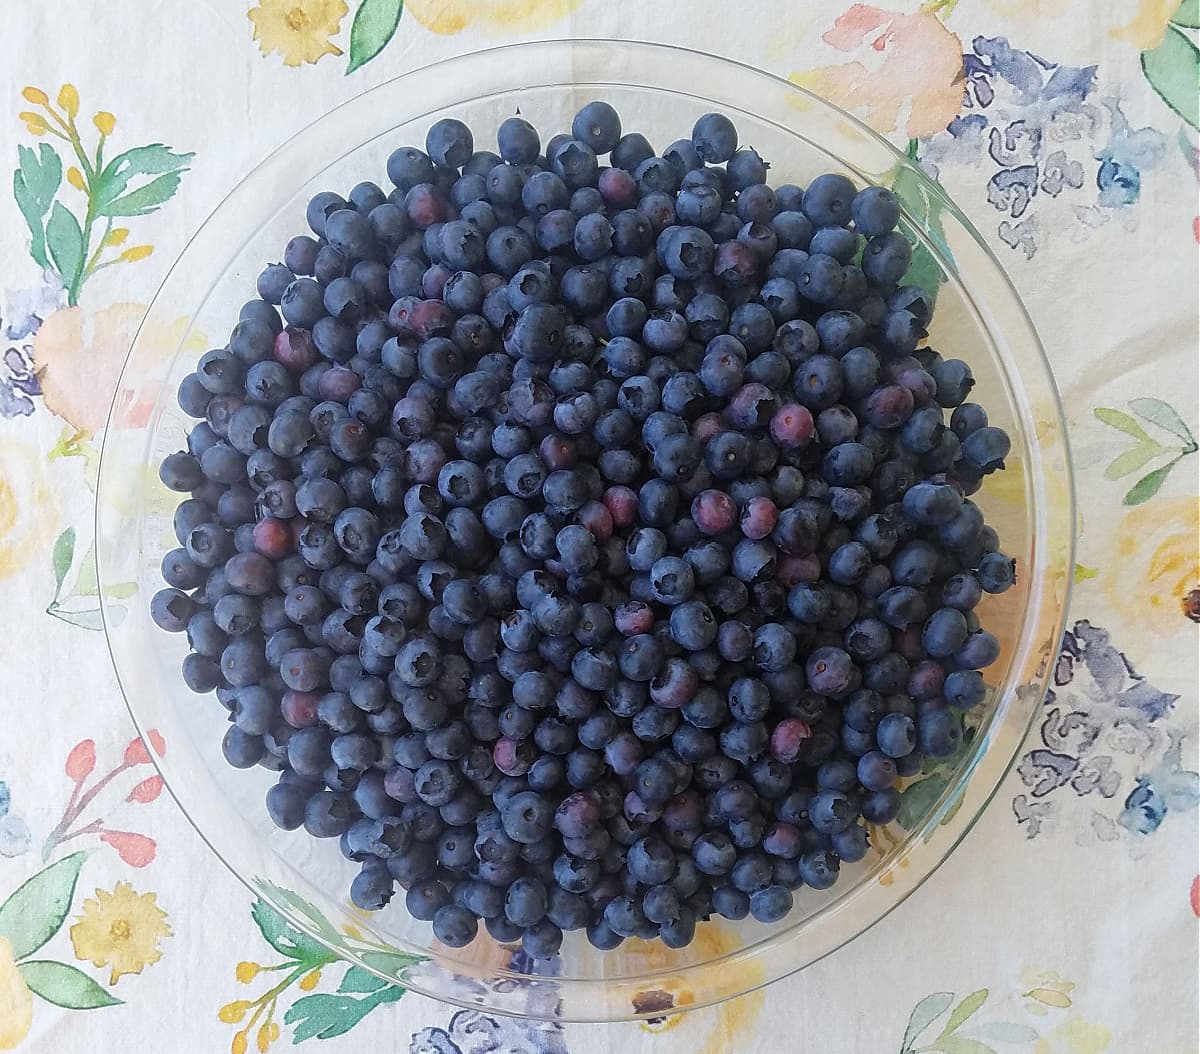 Overhead shot of a large glass pie dish filled with fresh blueberries.